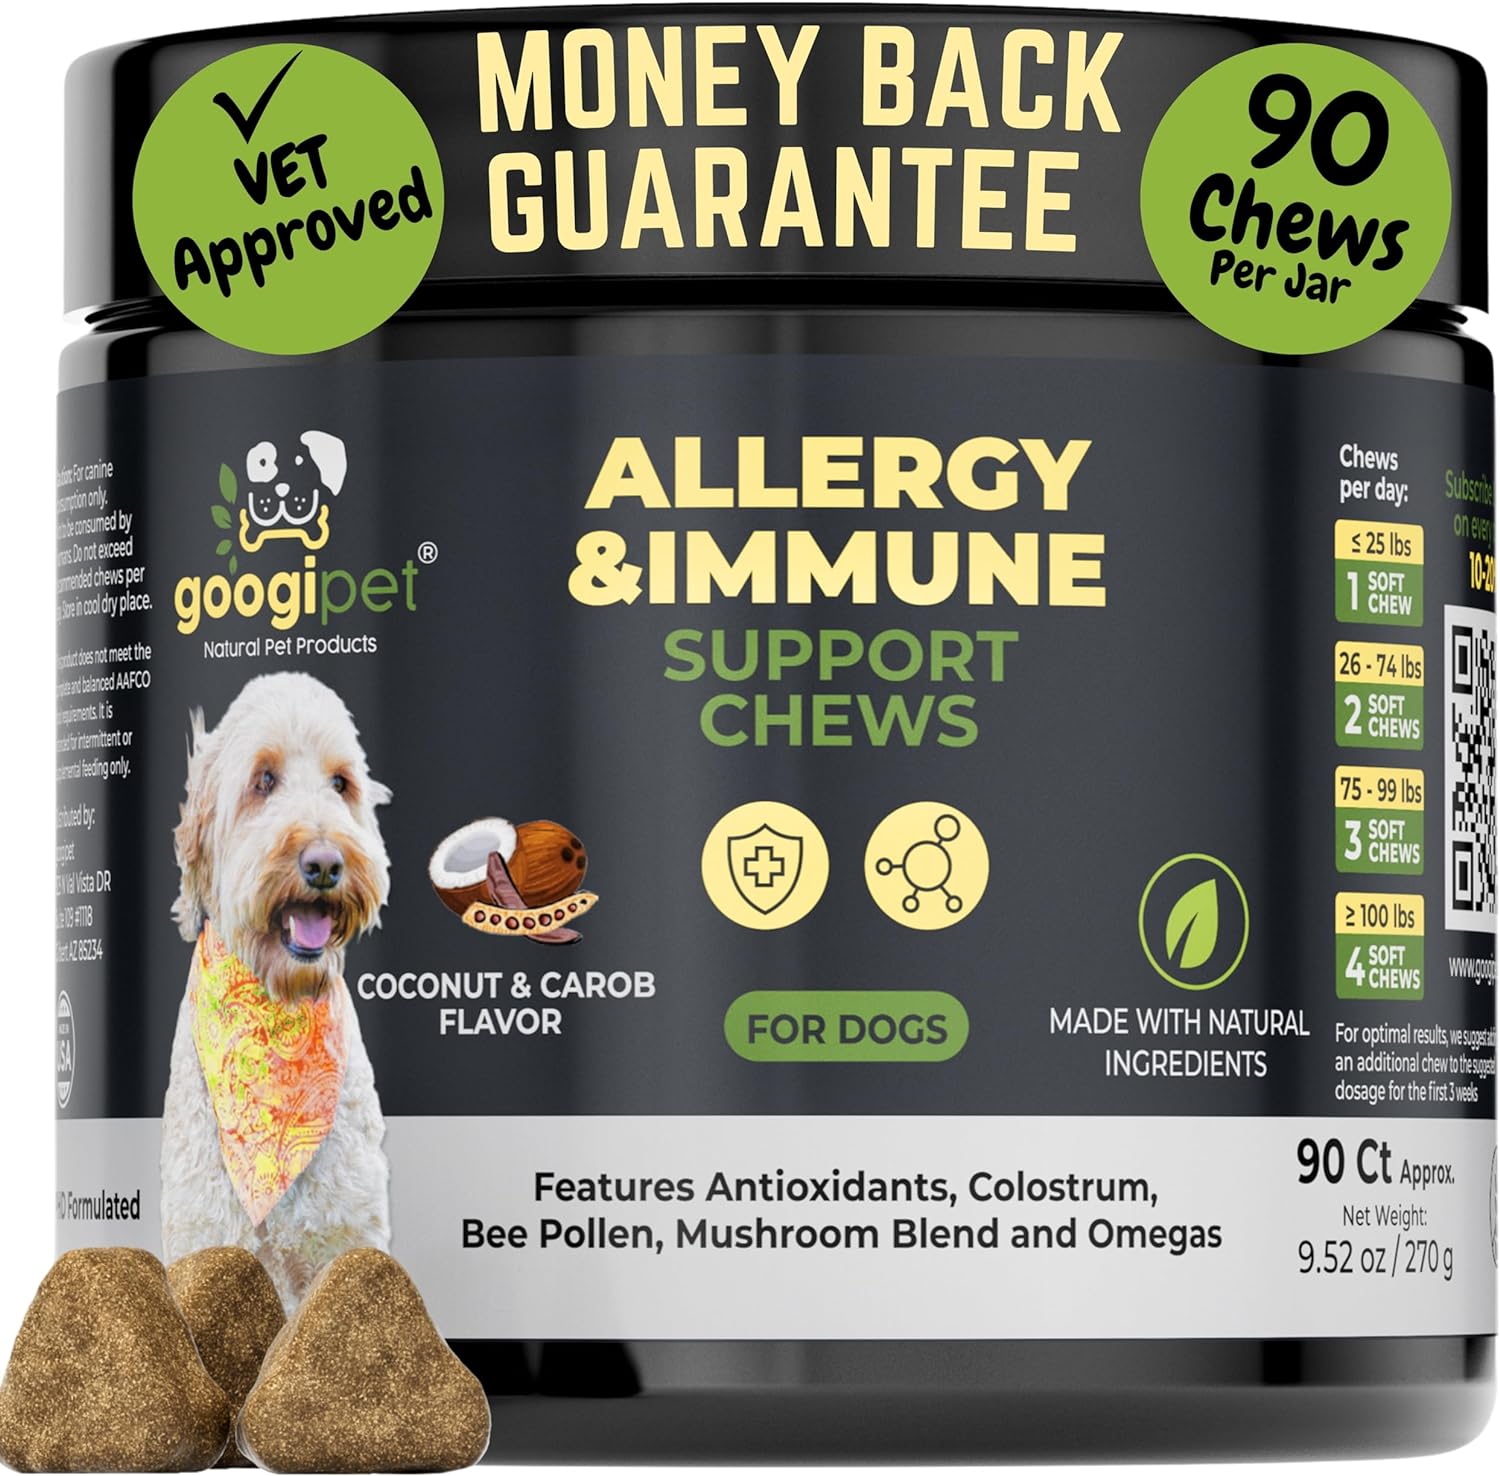 Googipet Dog Allergy Chews -Dog Allergy Relief & Itchy Skin Relief -Dog Skin & Coat Supplement +Bee Pollen, Colostrum for Dogs, Coconut Oil, Probiotics, & Omega 3 Fish Oil for Dogs Itching Skin Relief